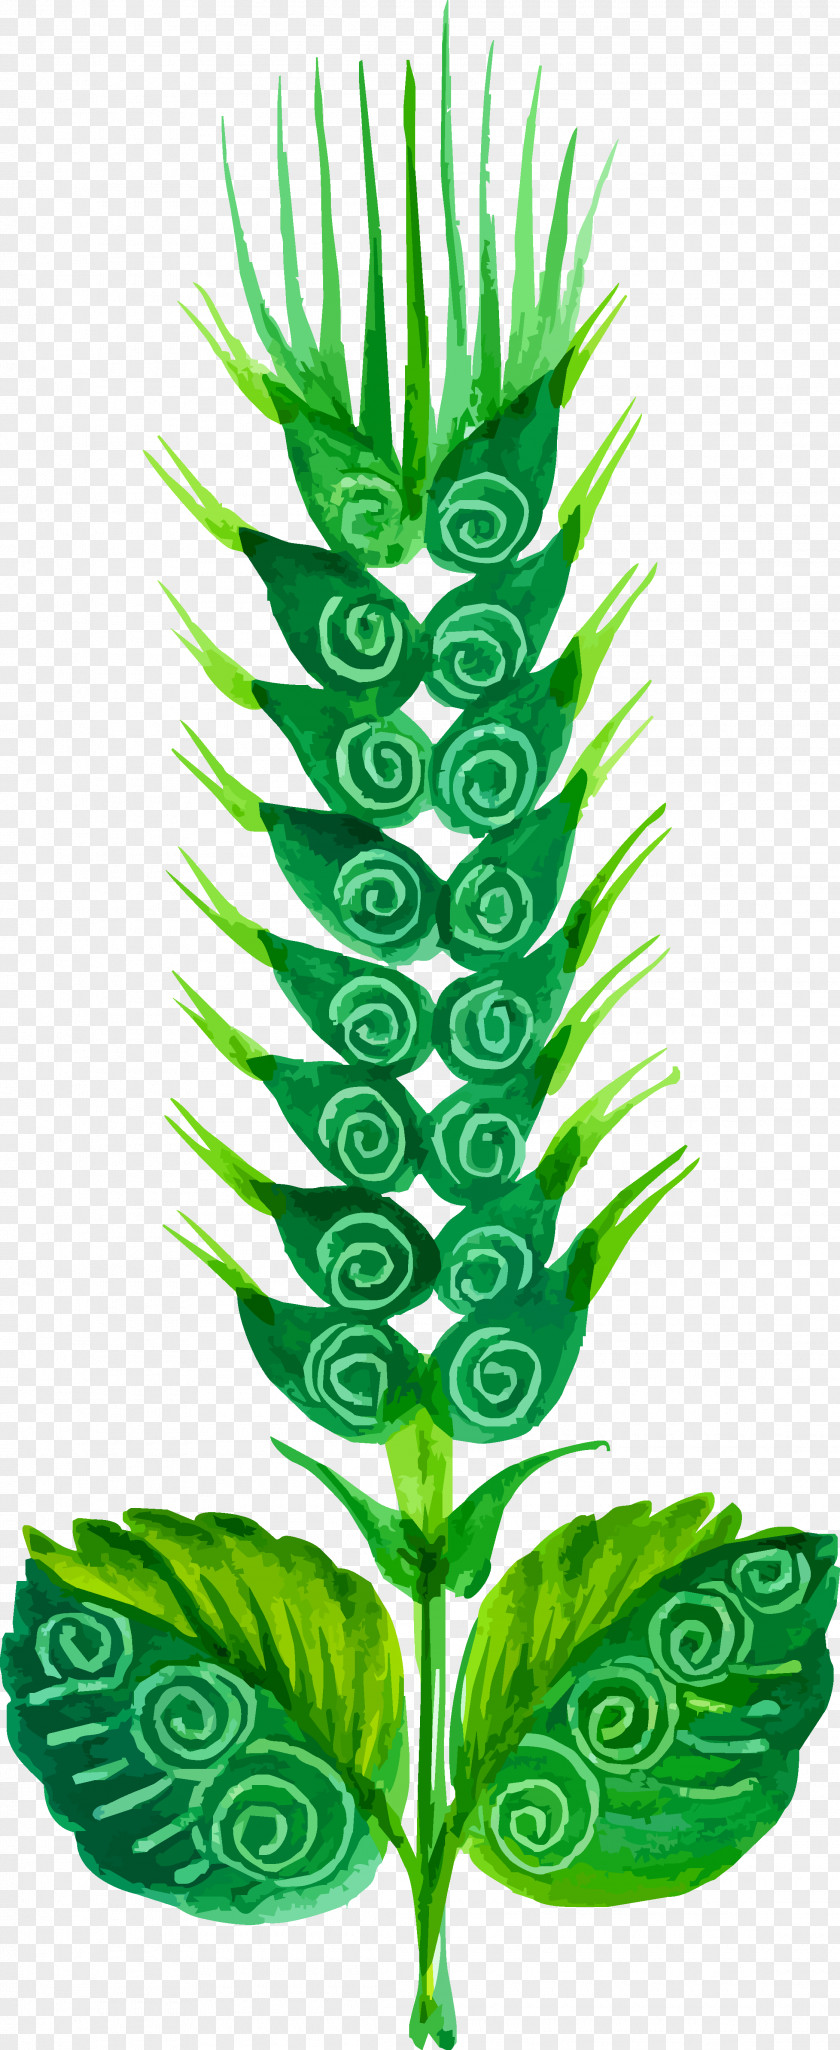 Green Wheat Flower Painting Euclidean Vector Cdr PNG